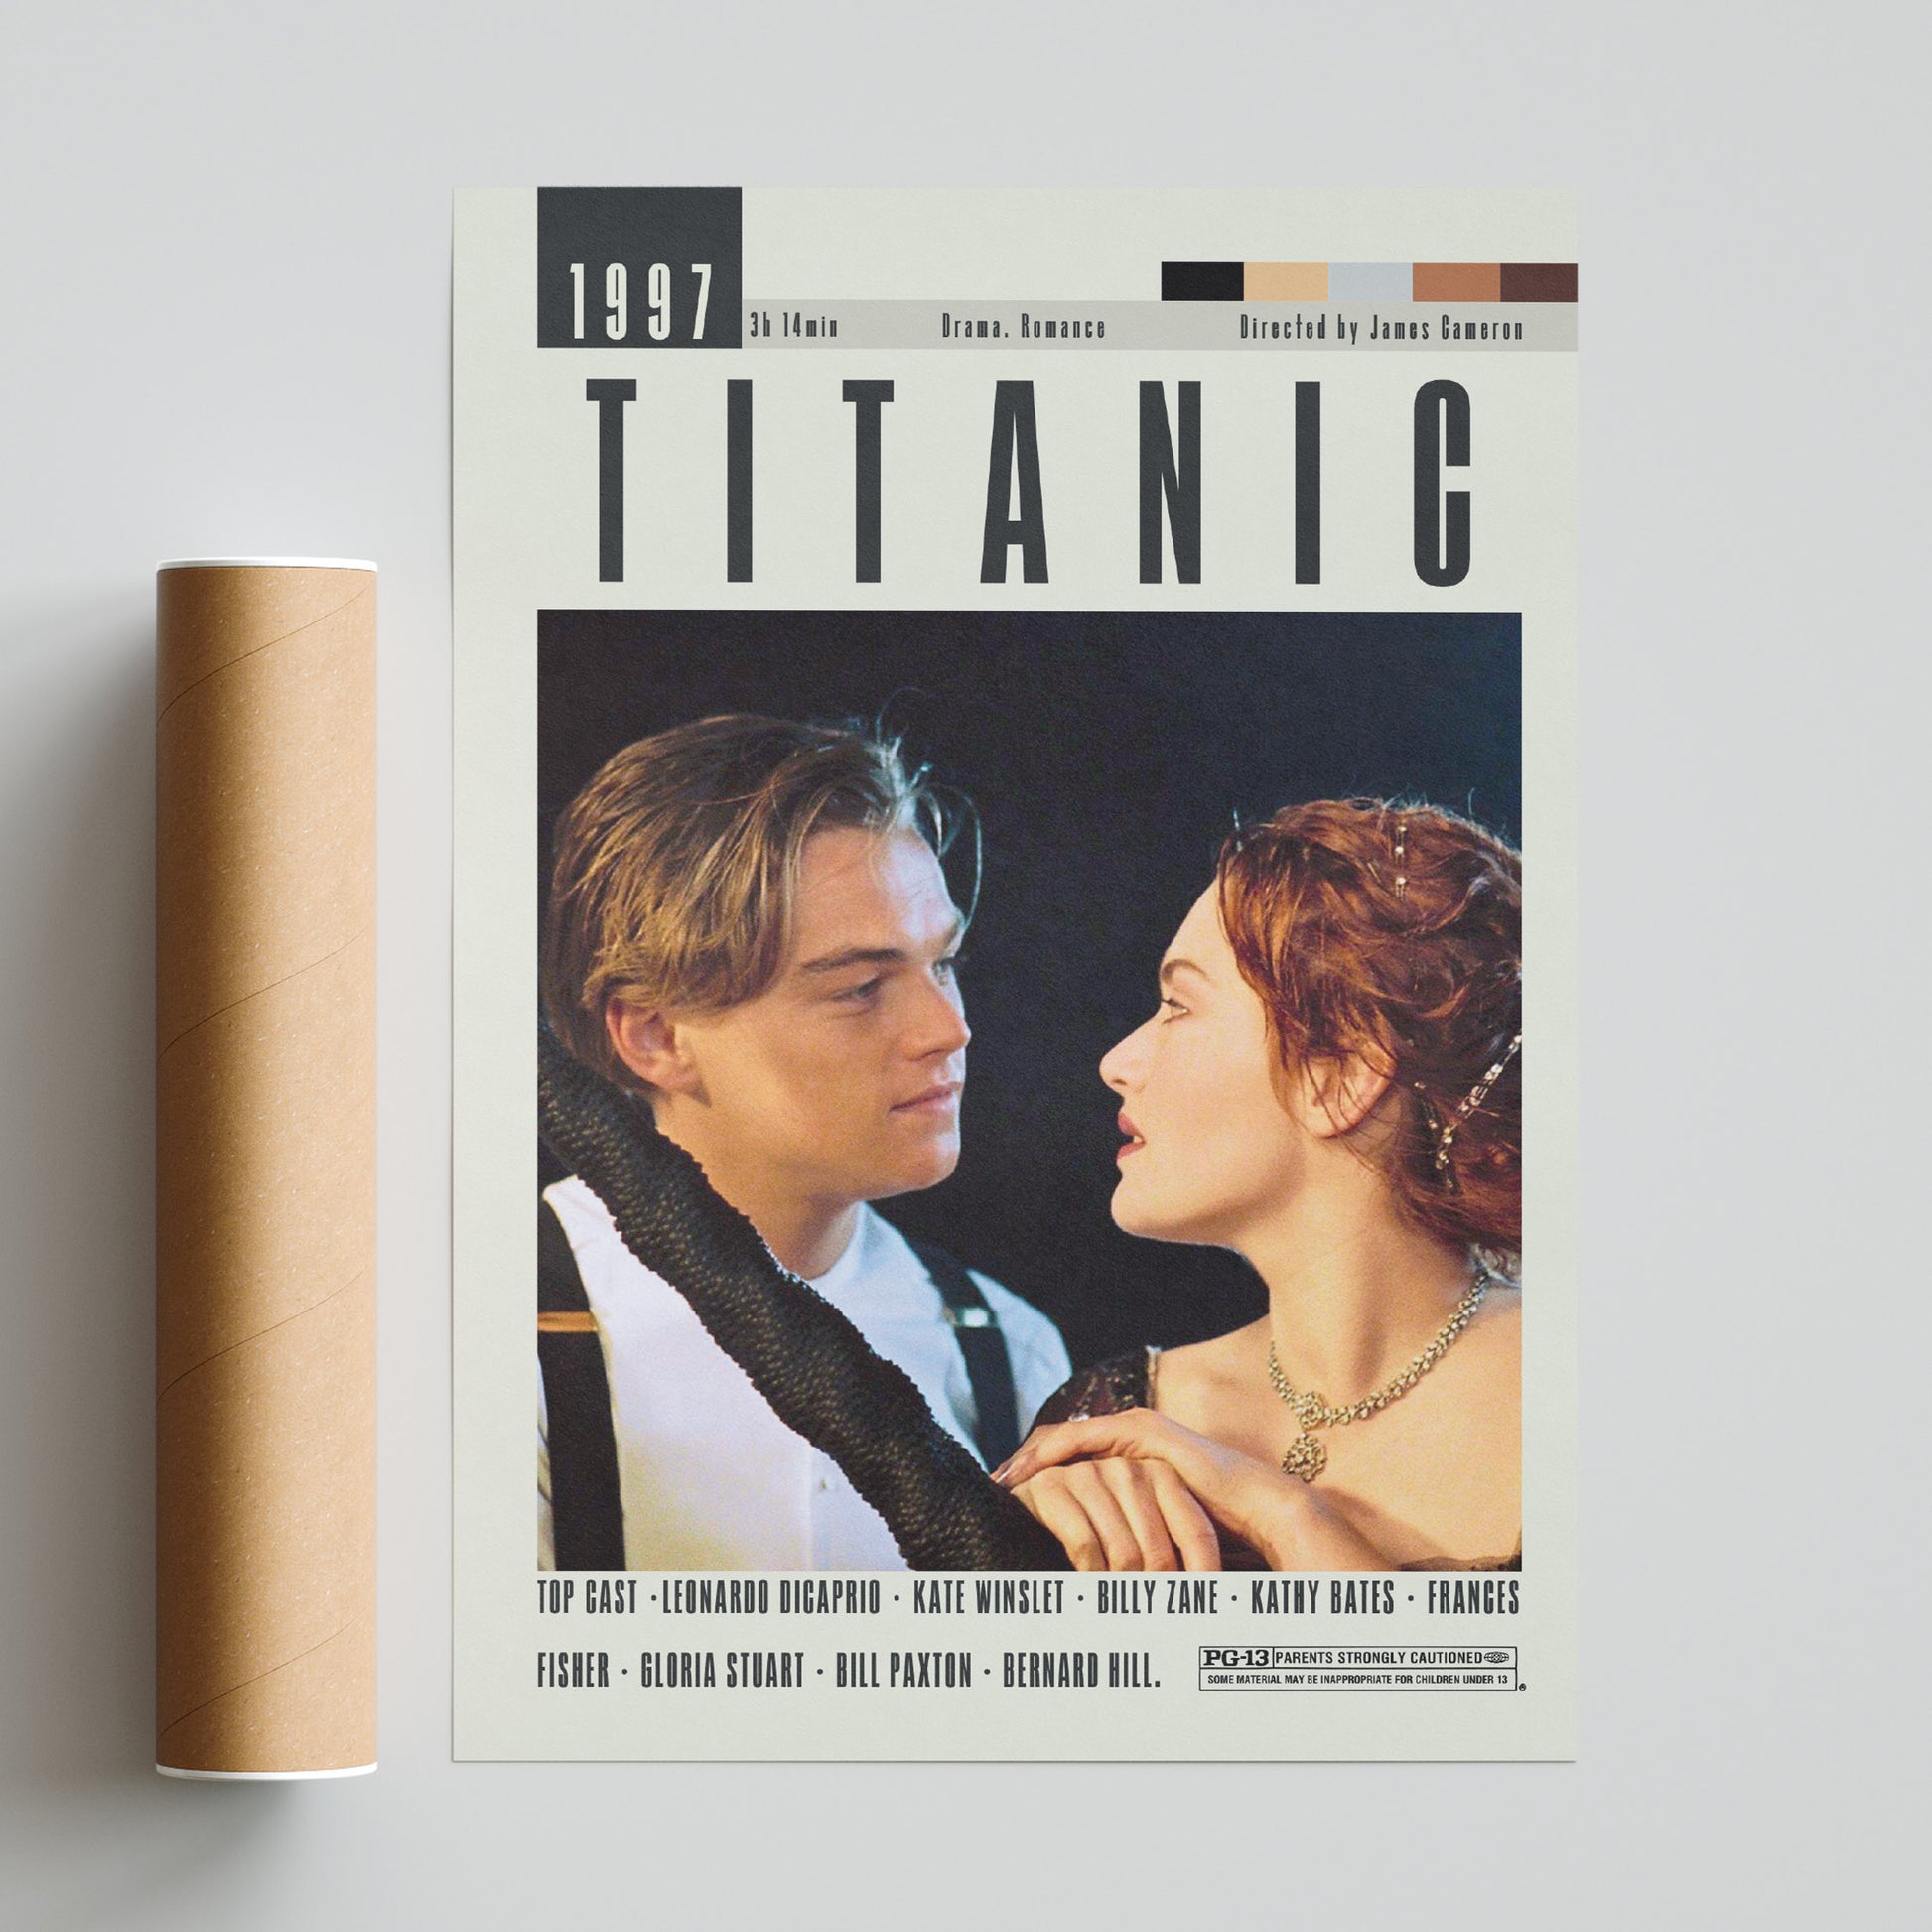 Add a touch of retro Hollywood to your home with this James Cameron movie poster. Featuring the iconic film Titanic, this midcentury style print is a must-have for any cinema lover. With its minimal design and unique charm, it's the perfect addition to your midcentury modern decor. Don't miss out on this best movie of all time!